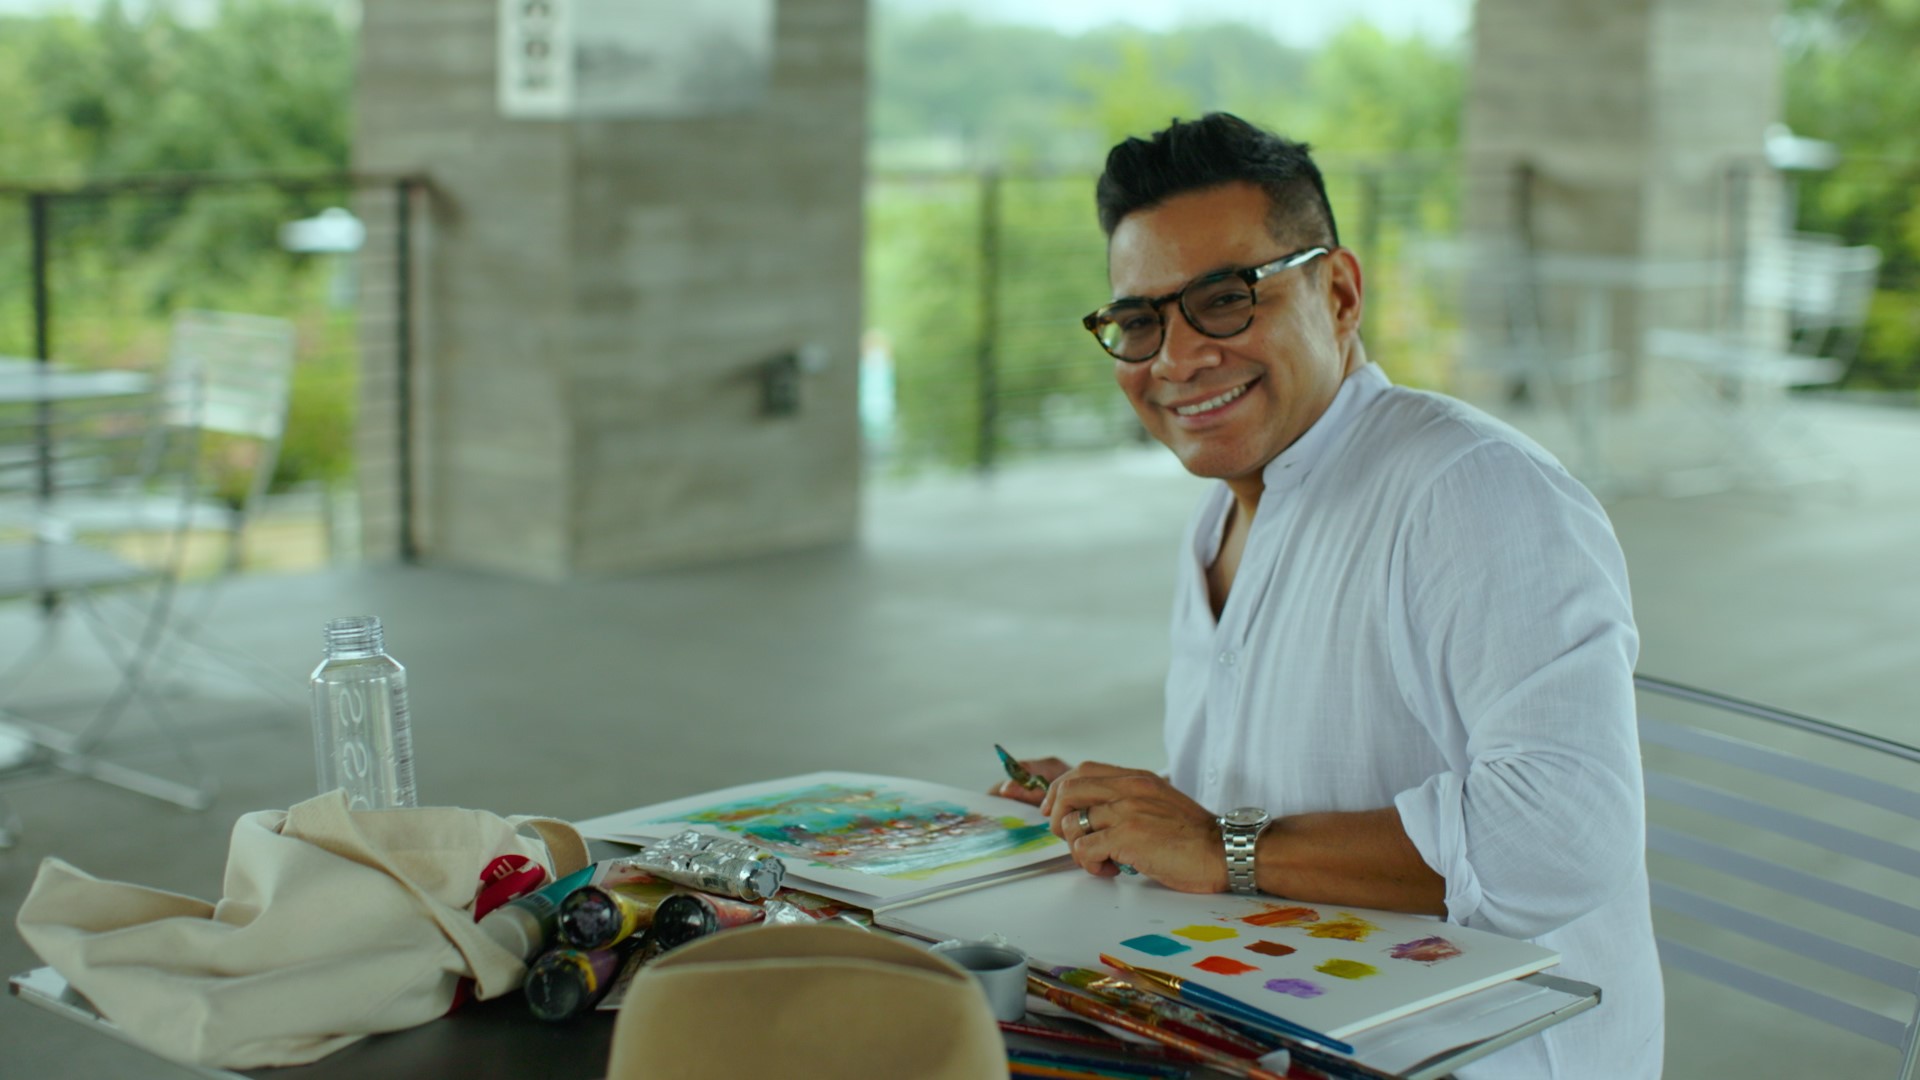 Edgar Medina loves being a Latin American artist in Houston, because he believes it’s important for kids to have someone to look up to that looks like them.